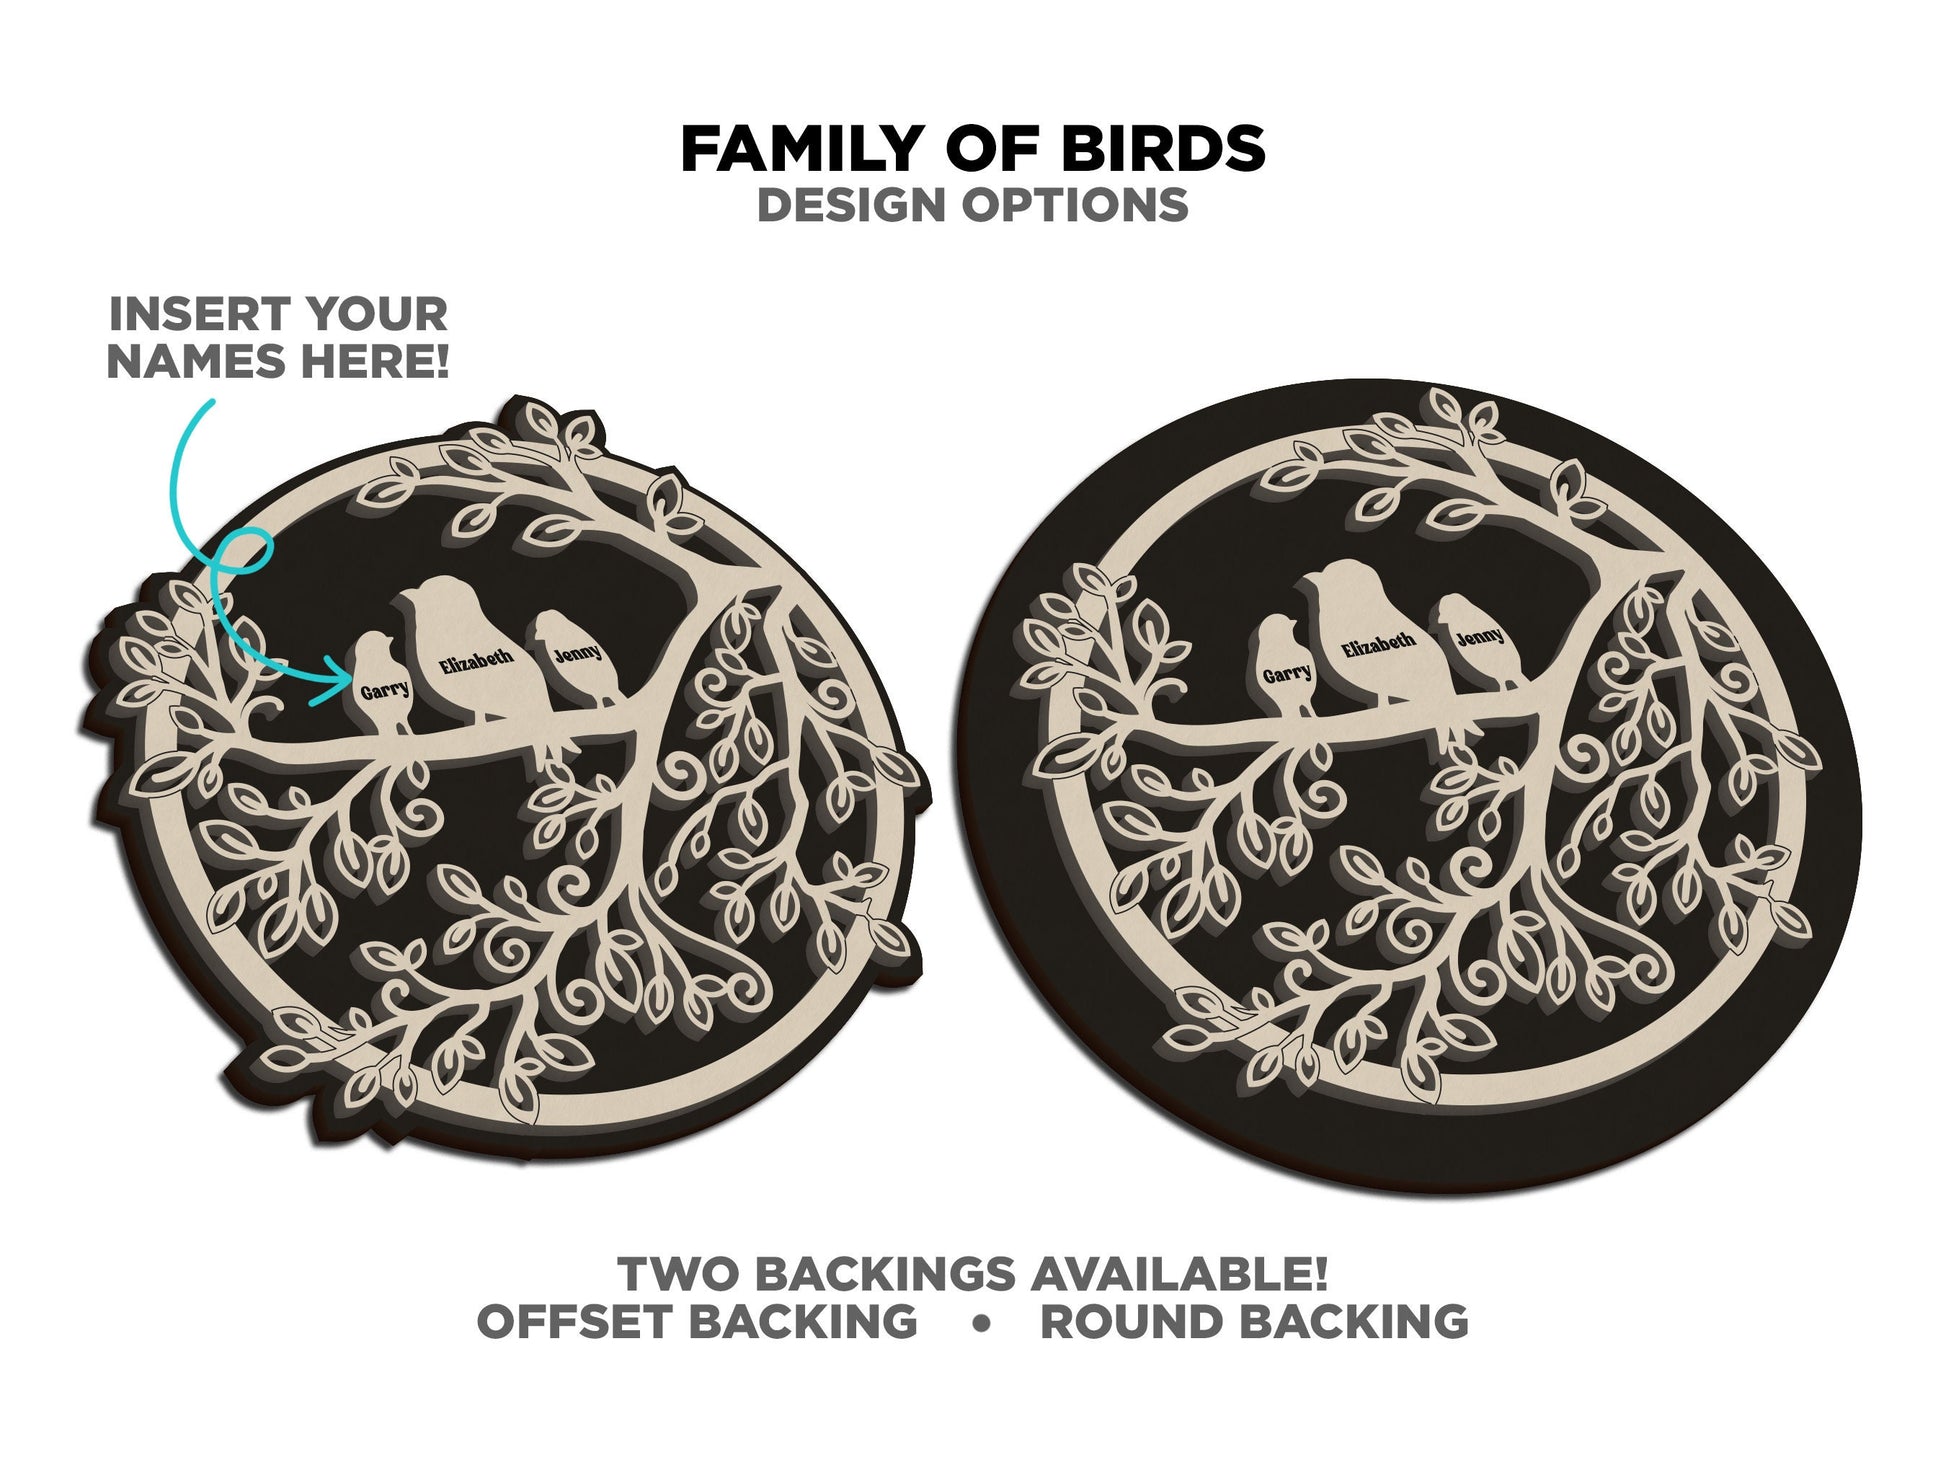 Family of Birds Personalized Decor Signage - SVG, PDF & AI File Download - Tested on Glowforge and Lightburn